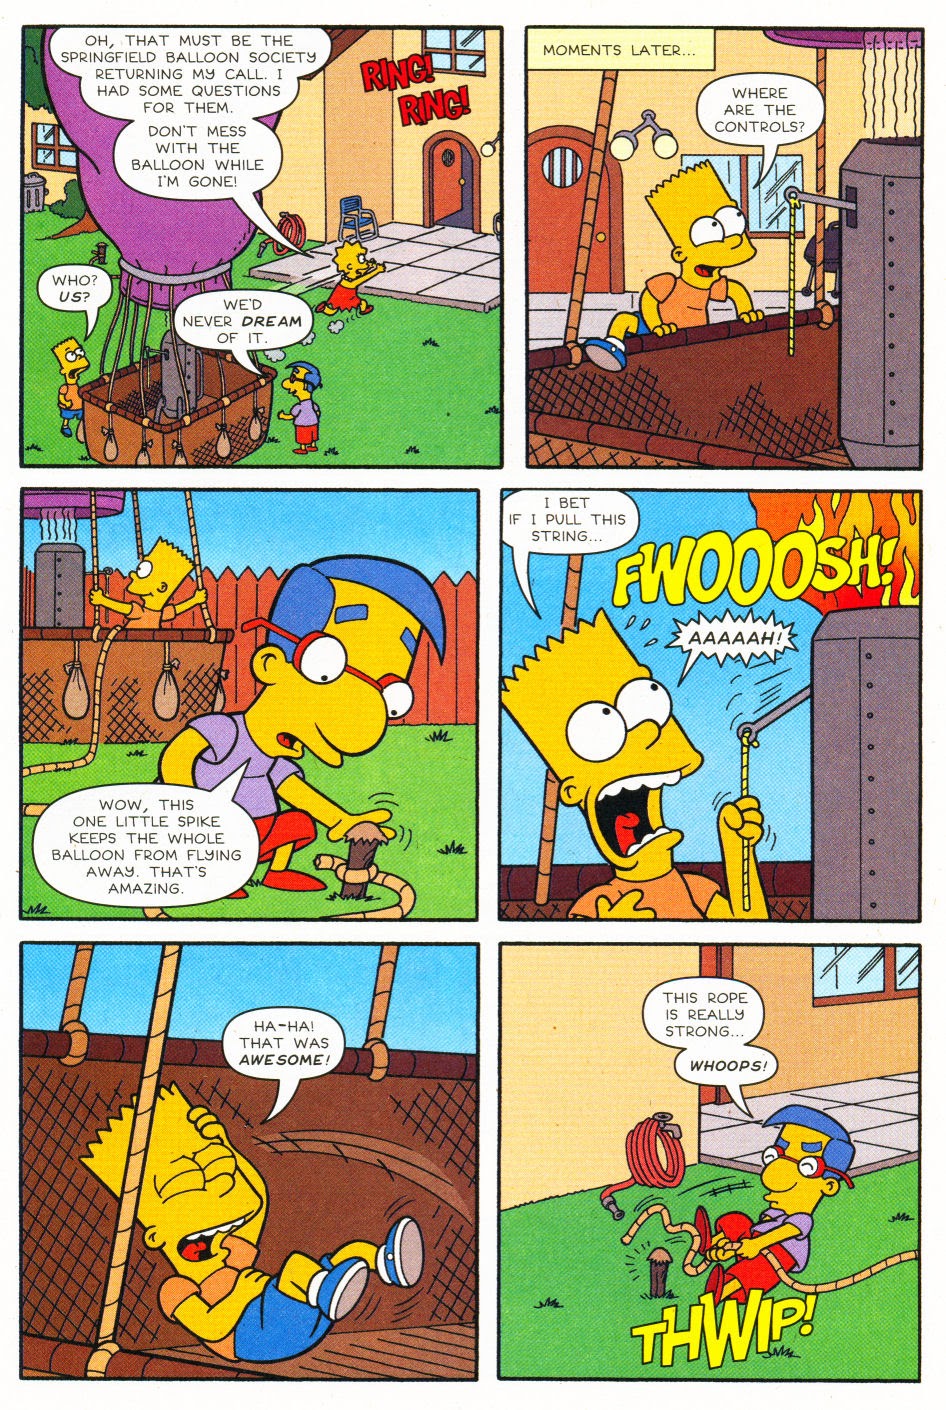 Read online Bart Simpson comic -  Issue #27 - 4